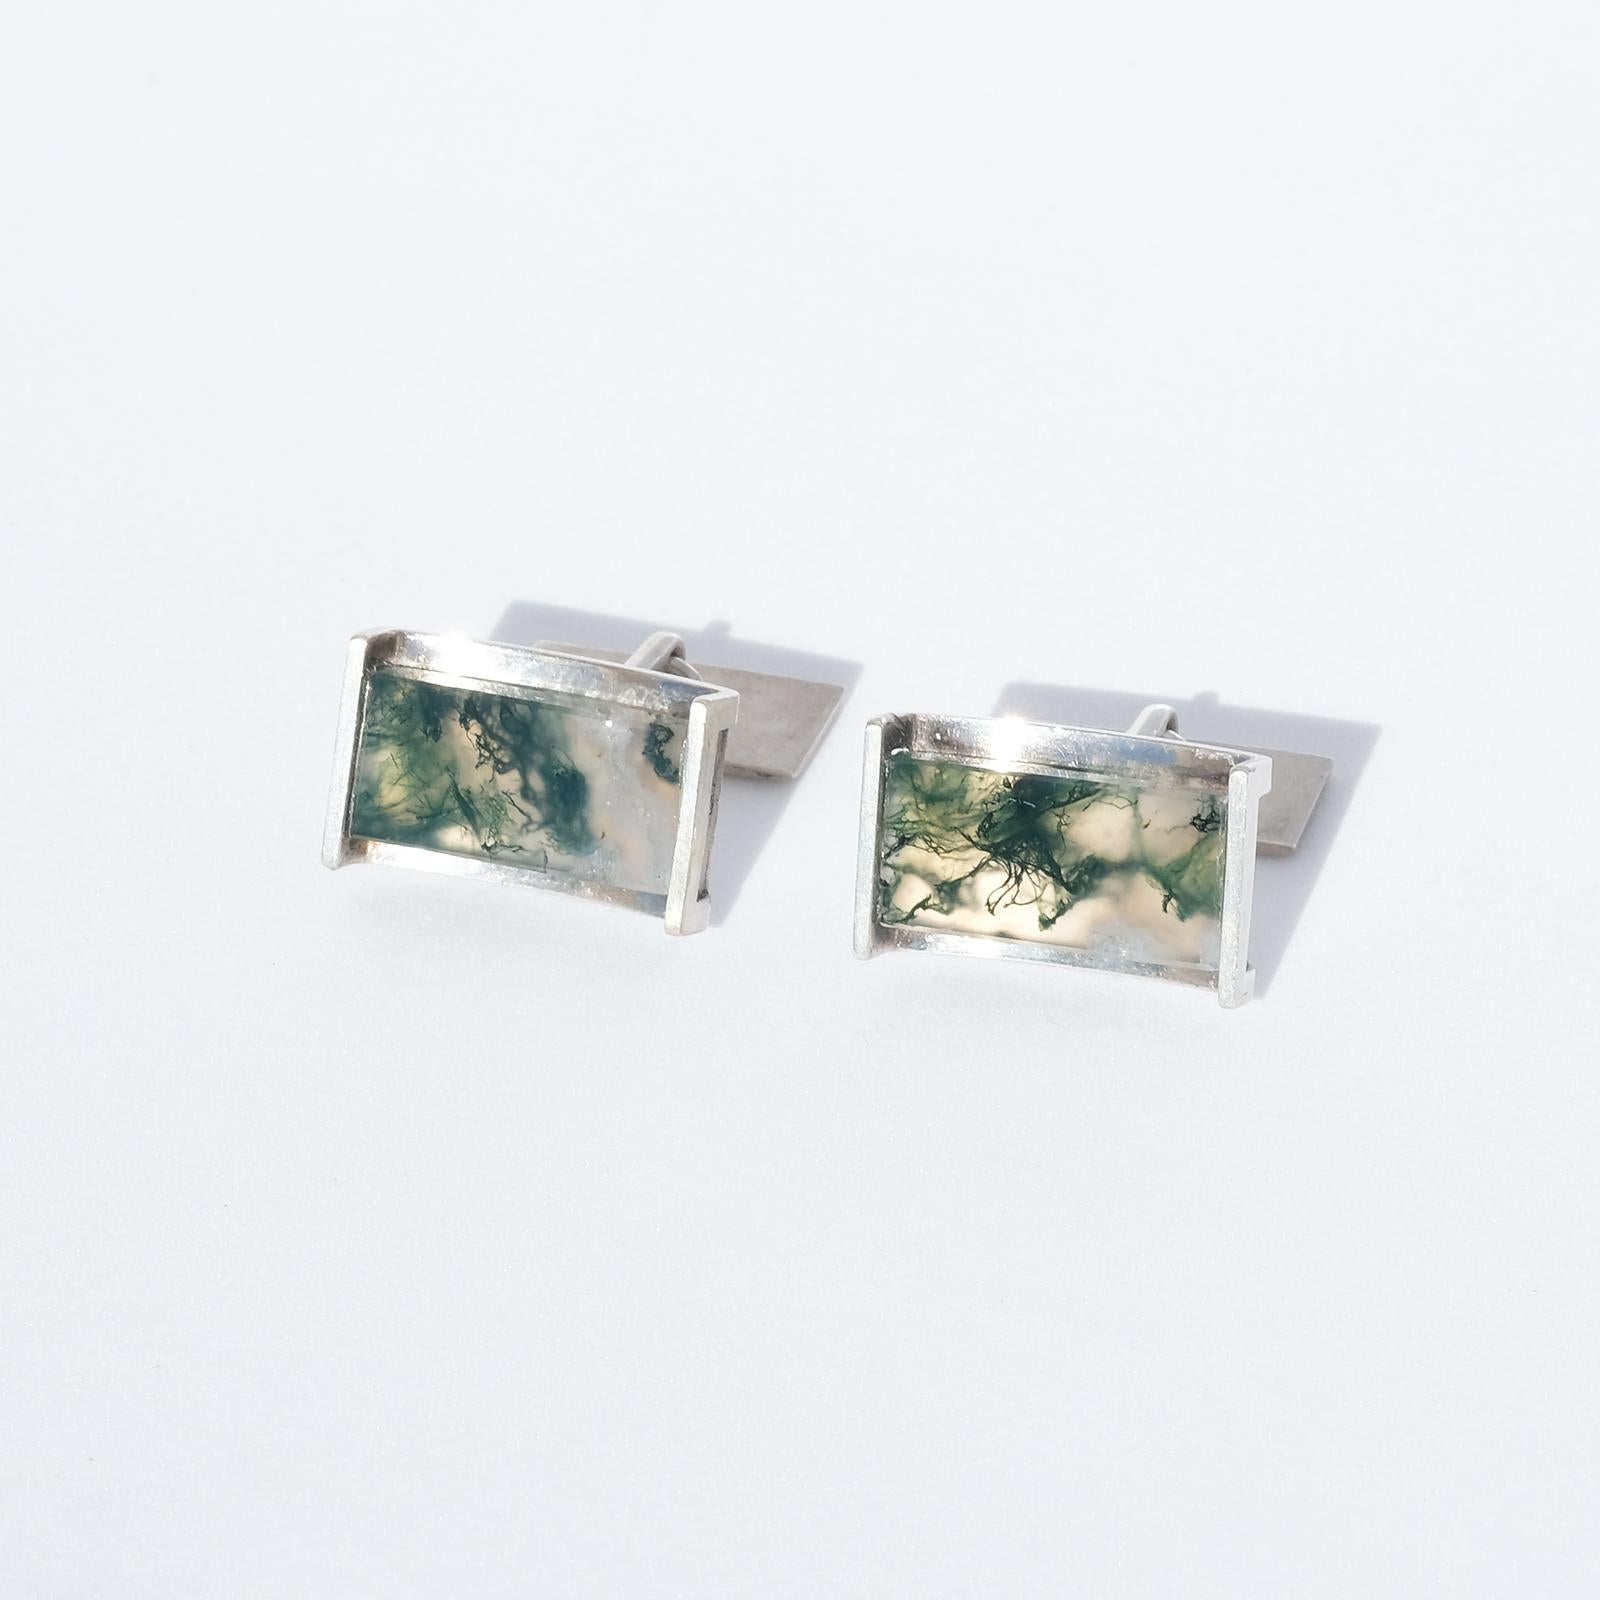 These silver cufflinks have a rectangular shape and they are decorated with large moss agates.

The moss agate stone is, as well as the simple and austere shape, a typical Elis Kauppi characteristic.   

The cufflinks' appearance is very chic and